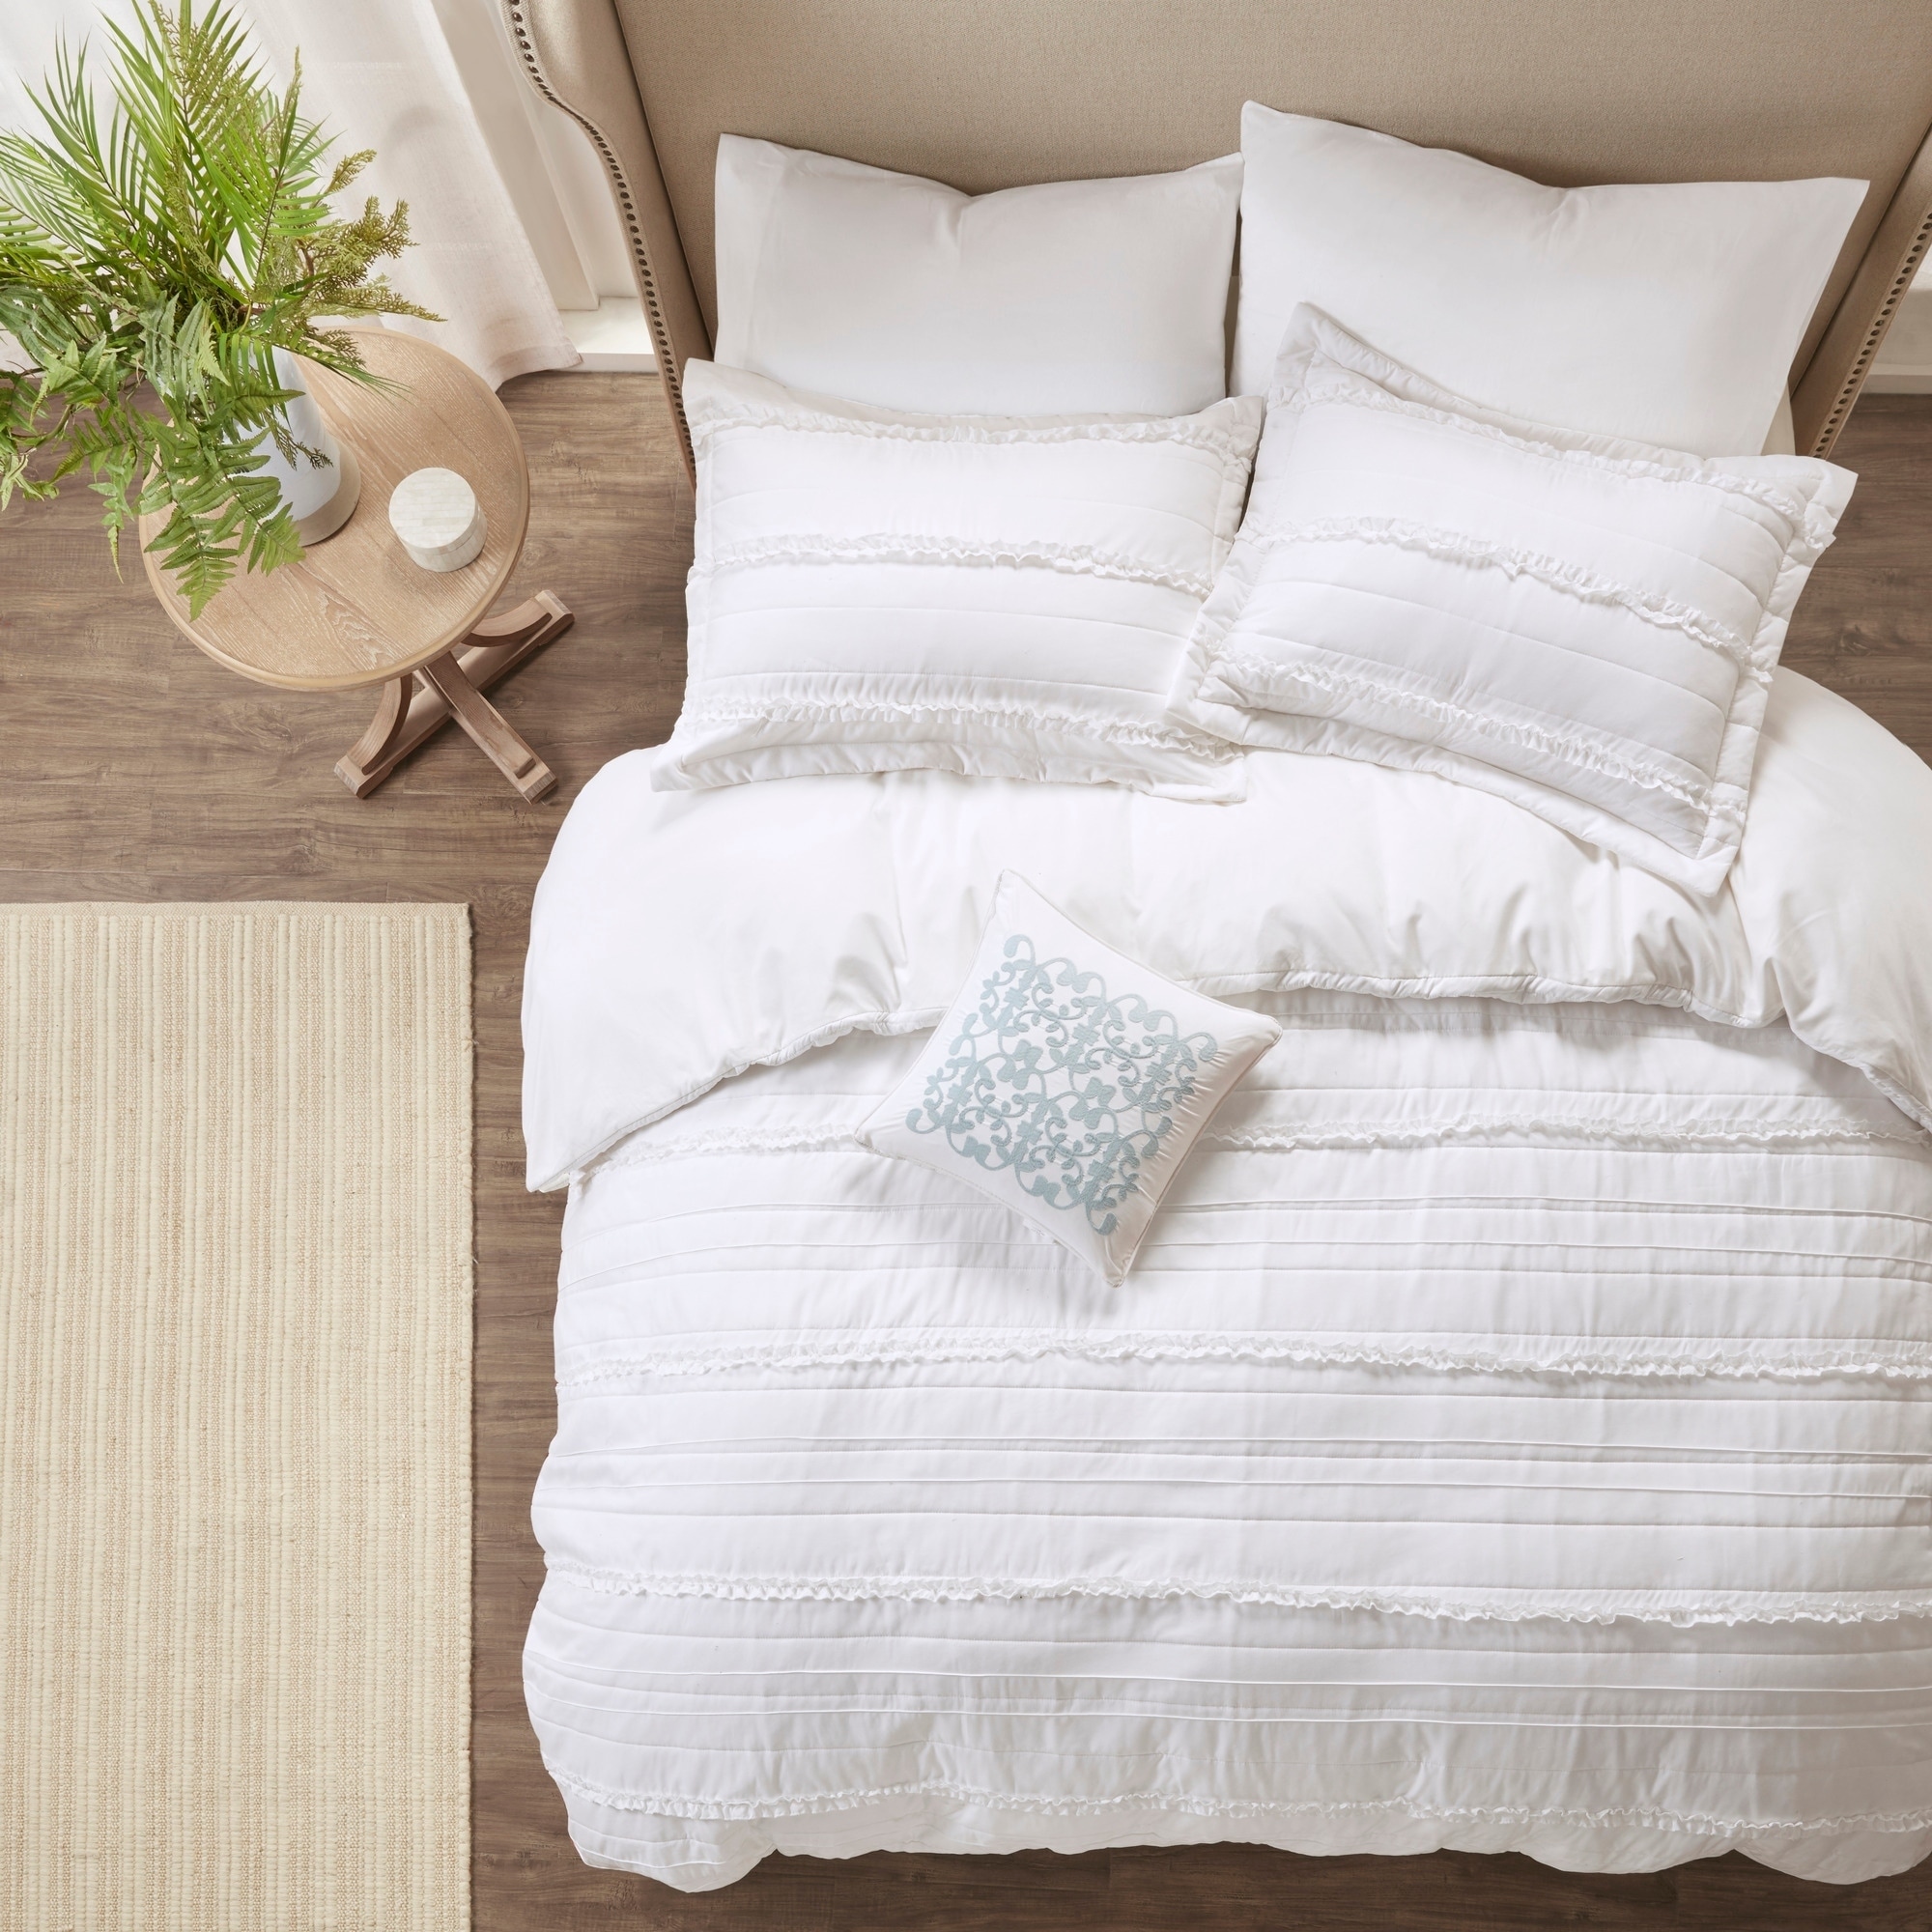 Shop Copper Grove Burwell Duvet Cover And Coverlet Set On Sale